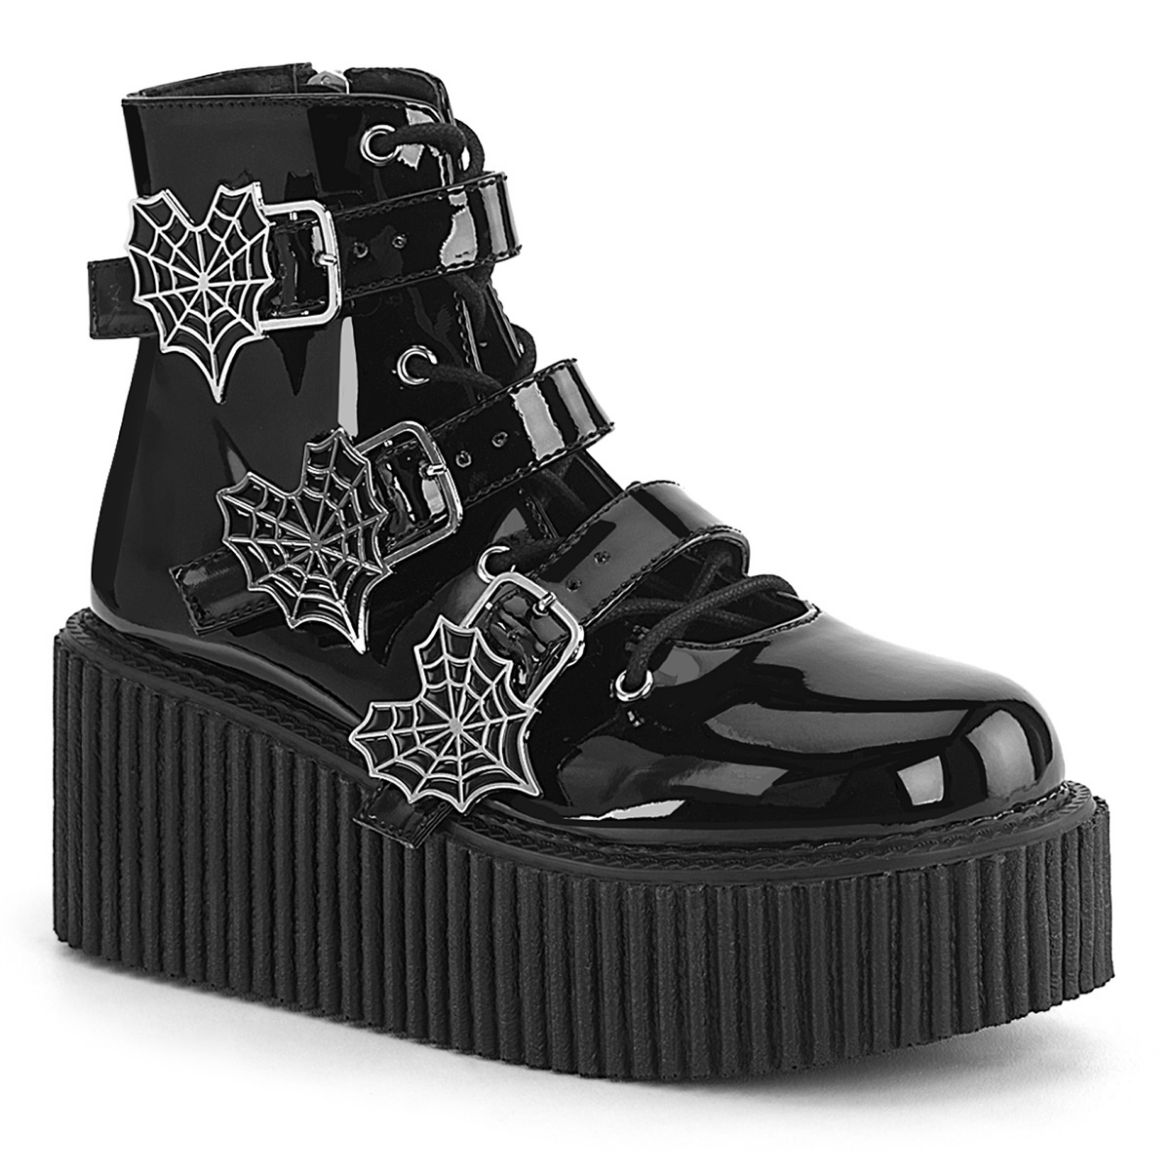 Product image of Demonia CREEPER-260 Blk Pat 3 Inch PF Lace-Up Ankle High Creeper w/ Buckle straps